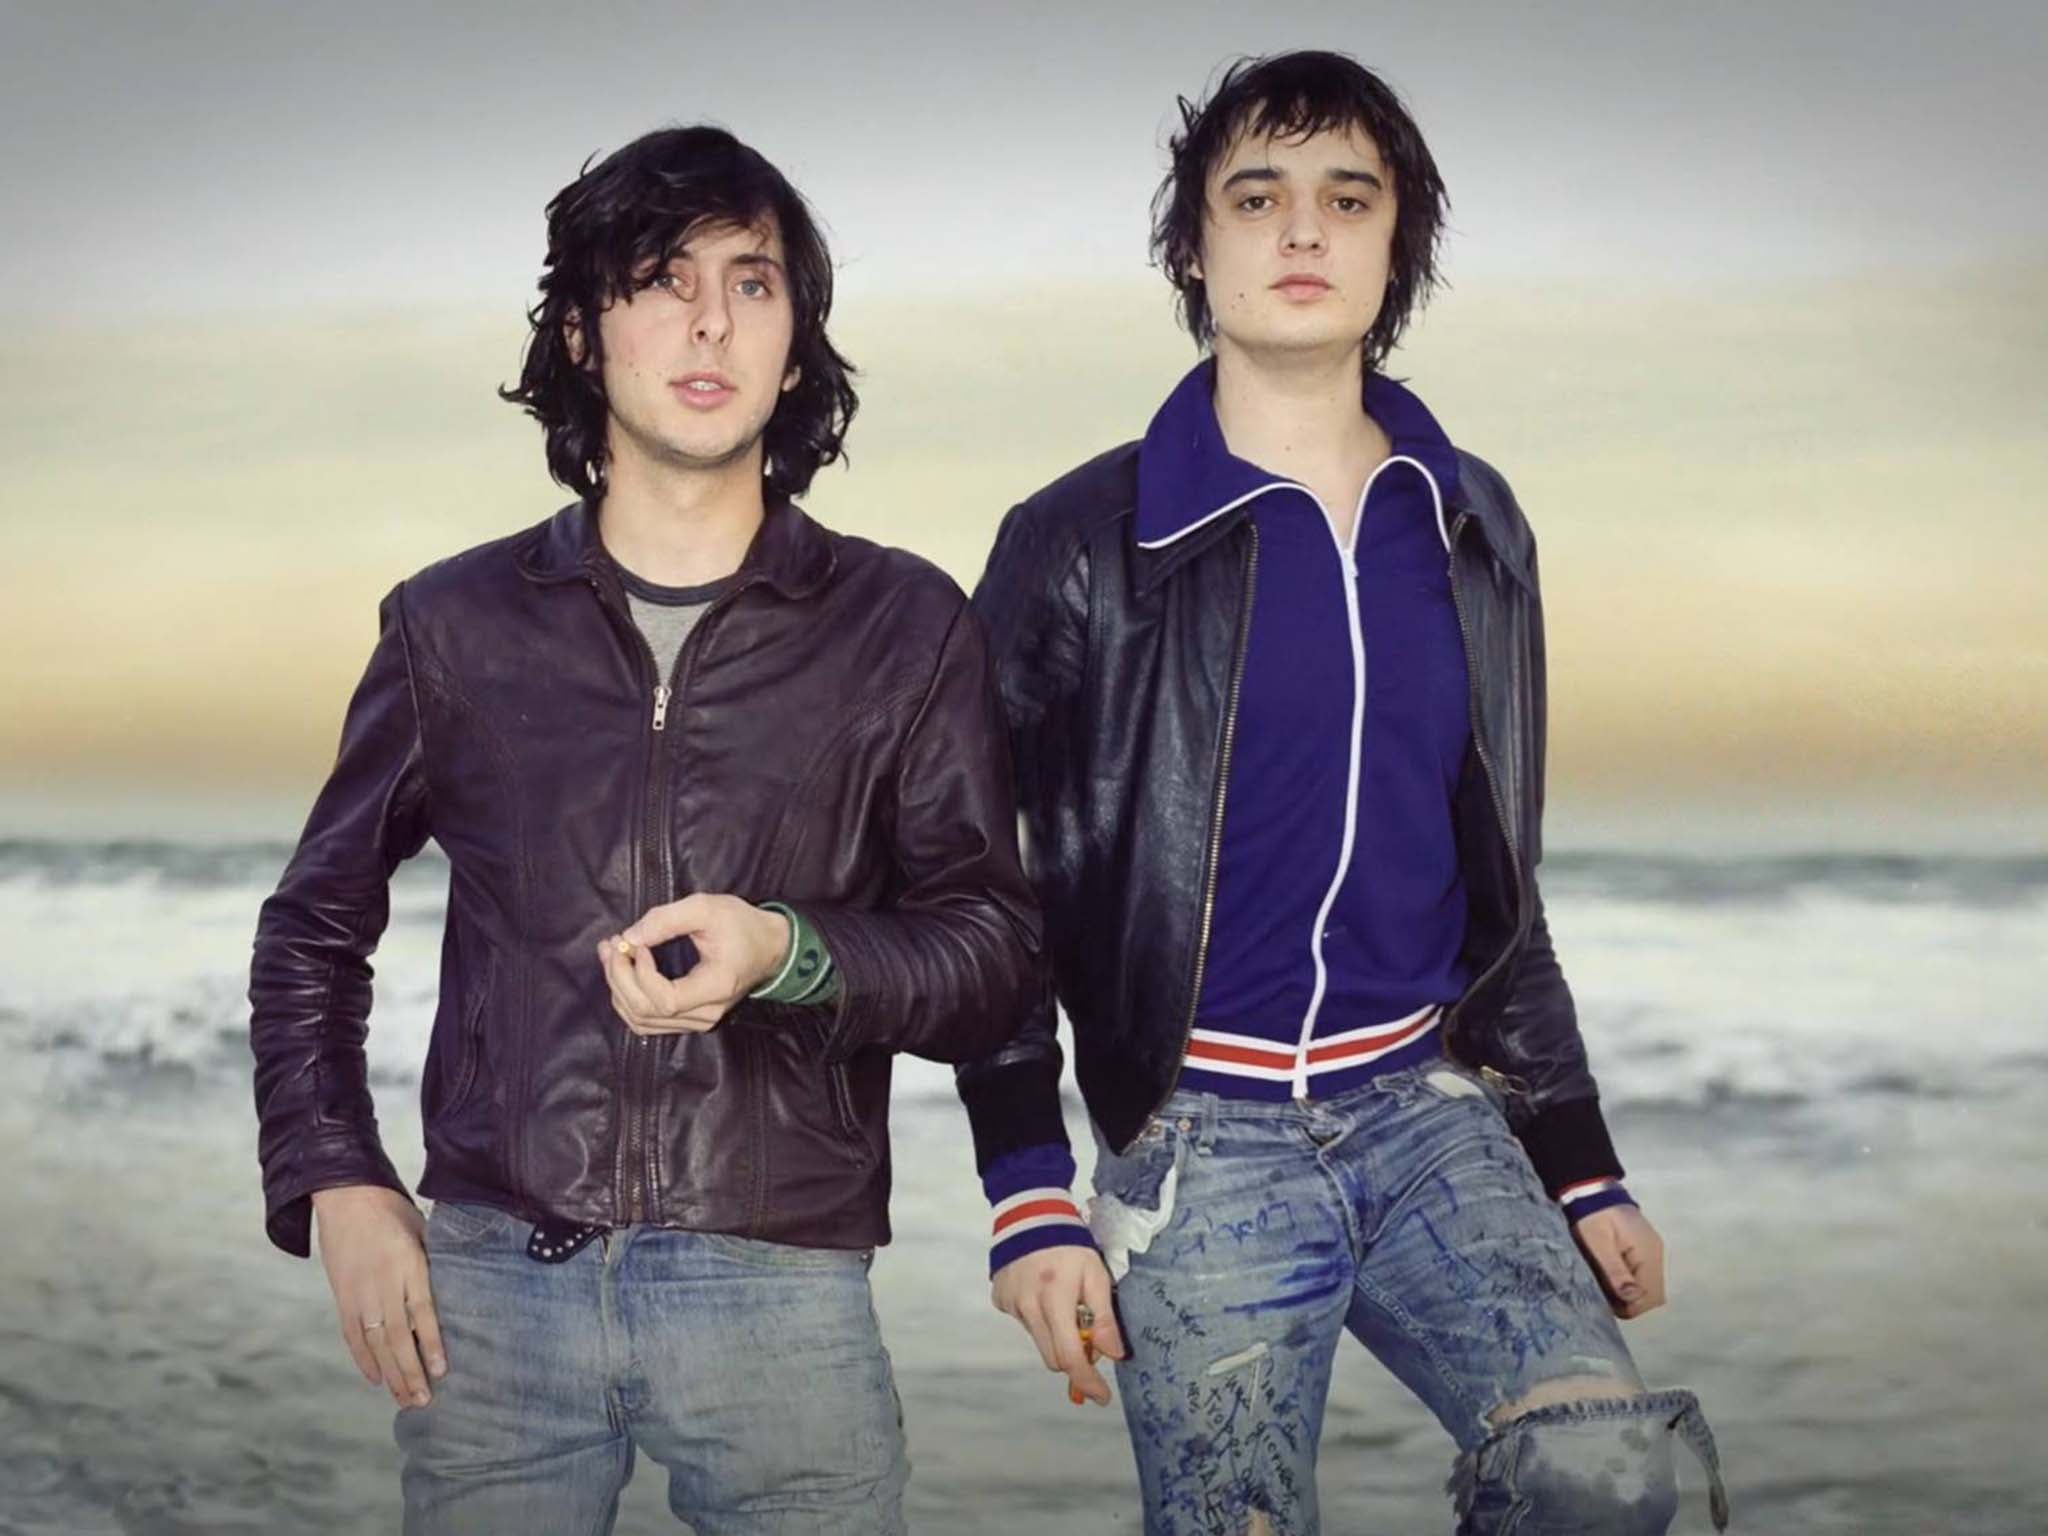 Carl Barat and Pete Dohrety in an image from the forthcoming Libertines short film